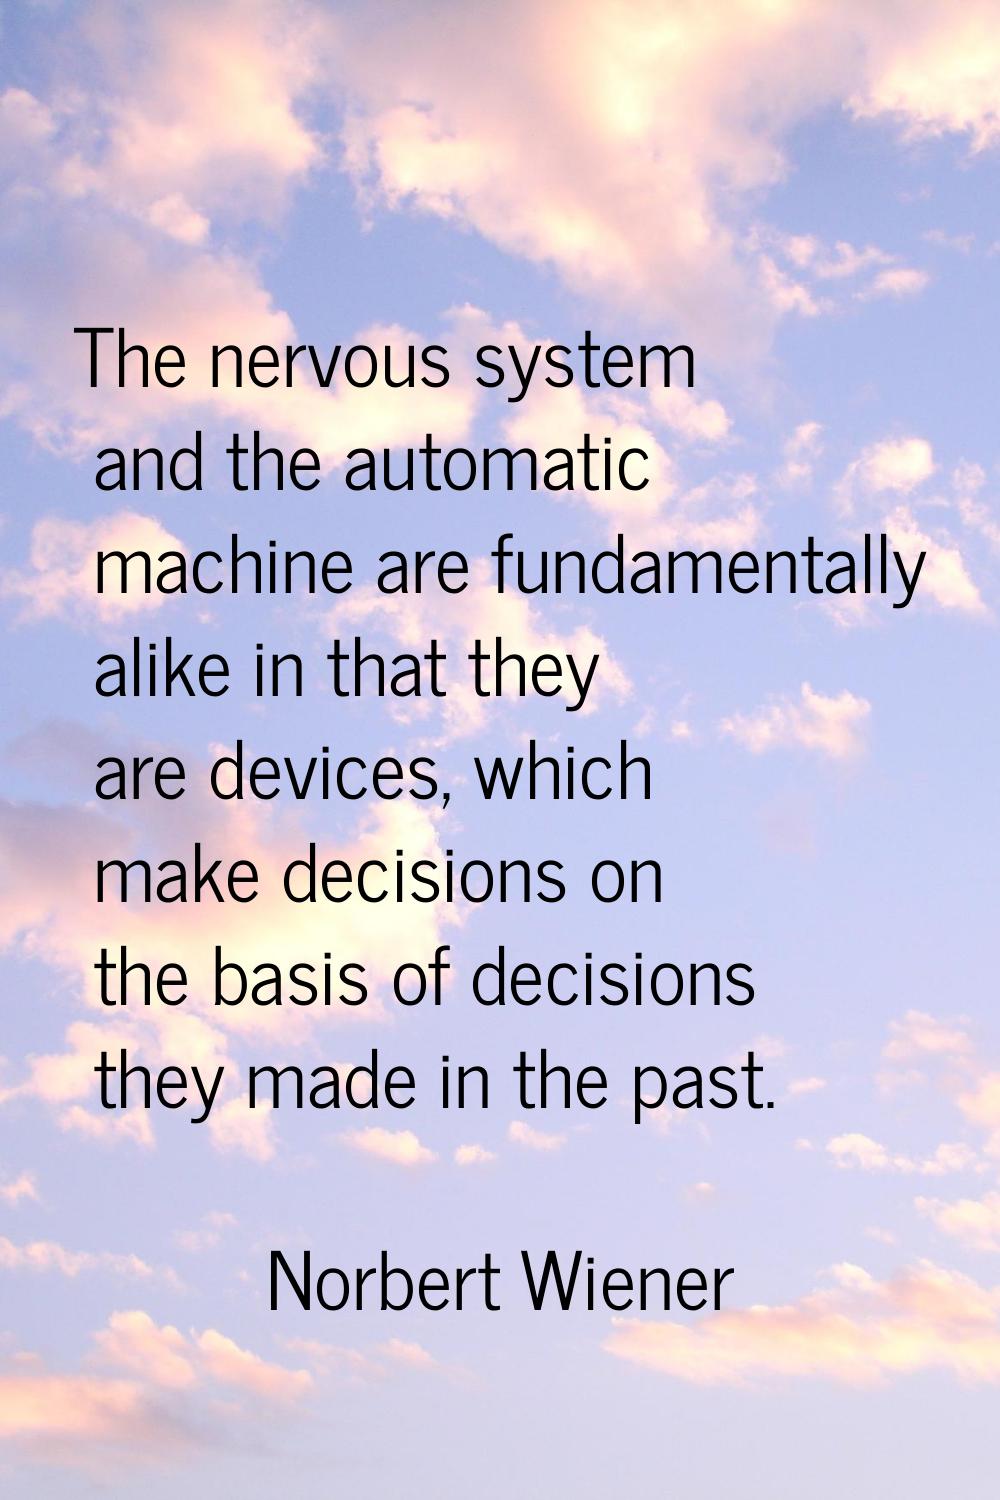 The nervous system and the automatic machine are fundamentally alike in that they are devices, whic